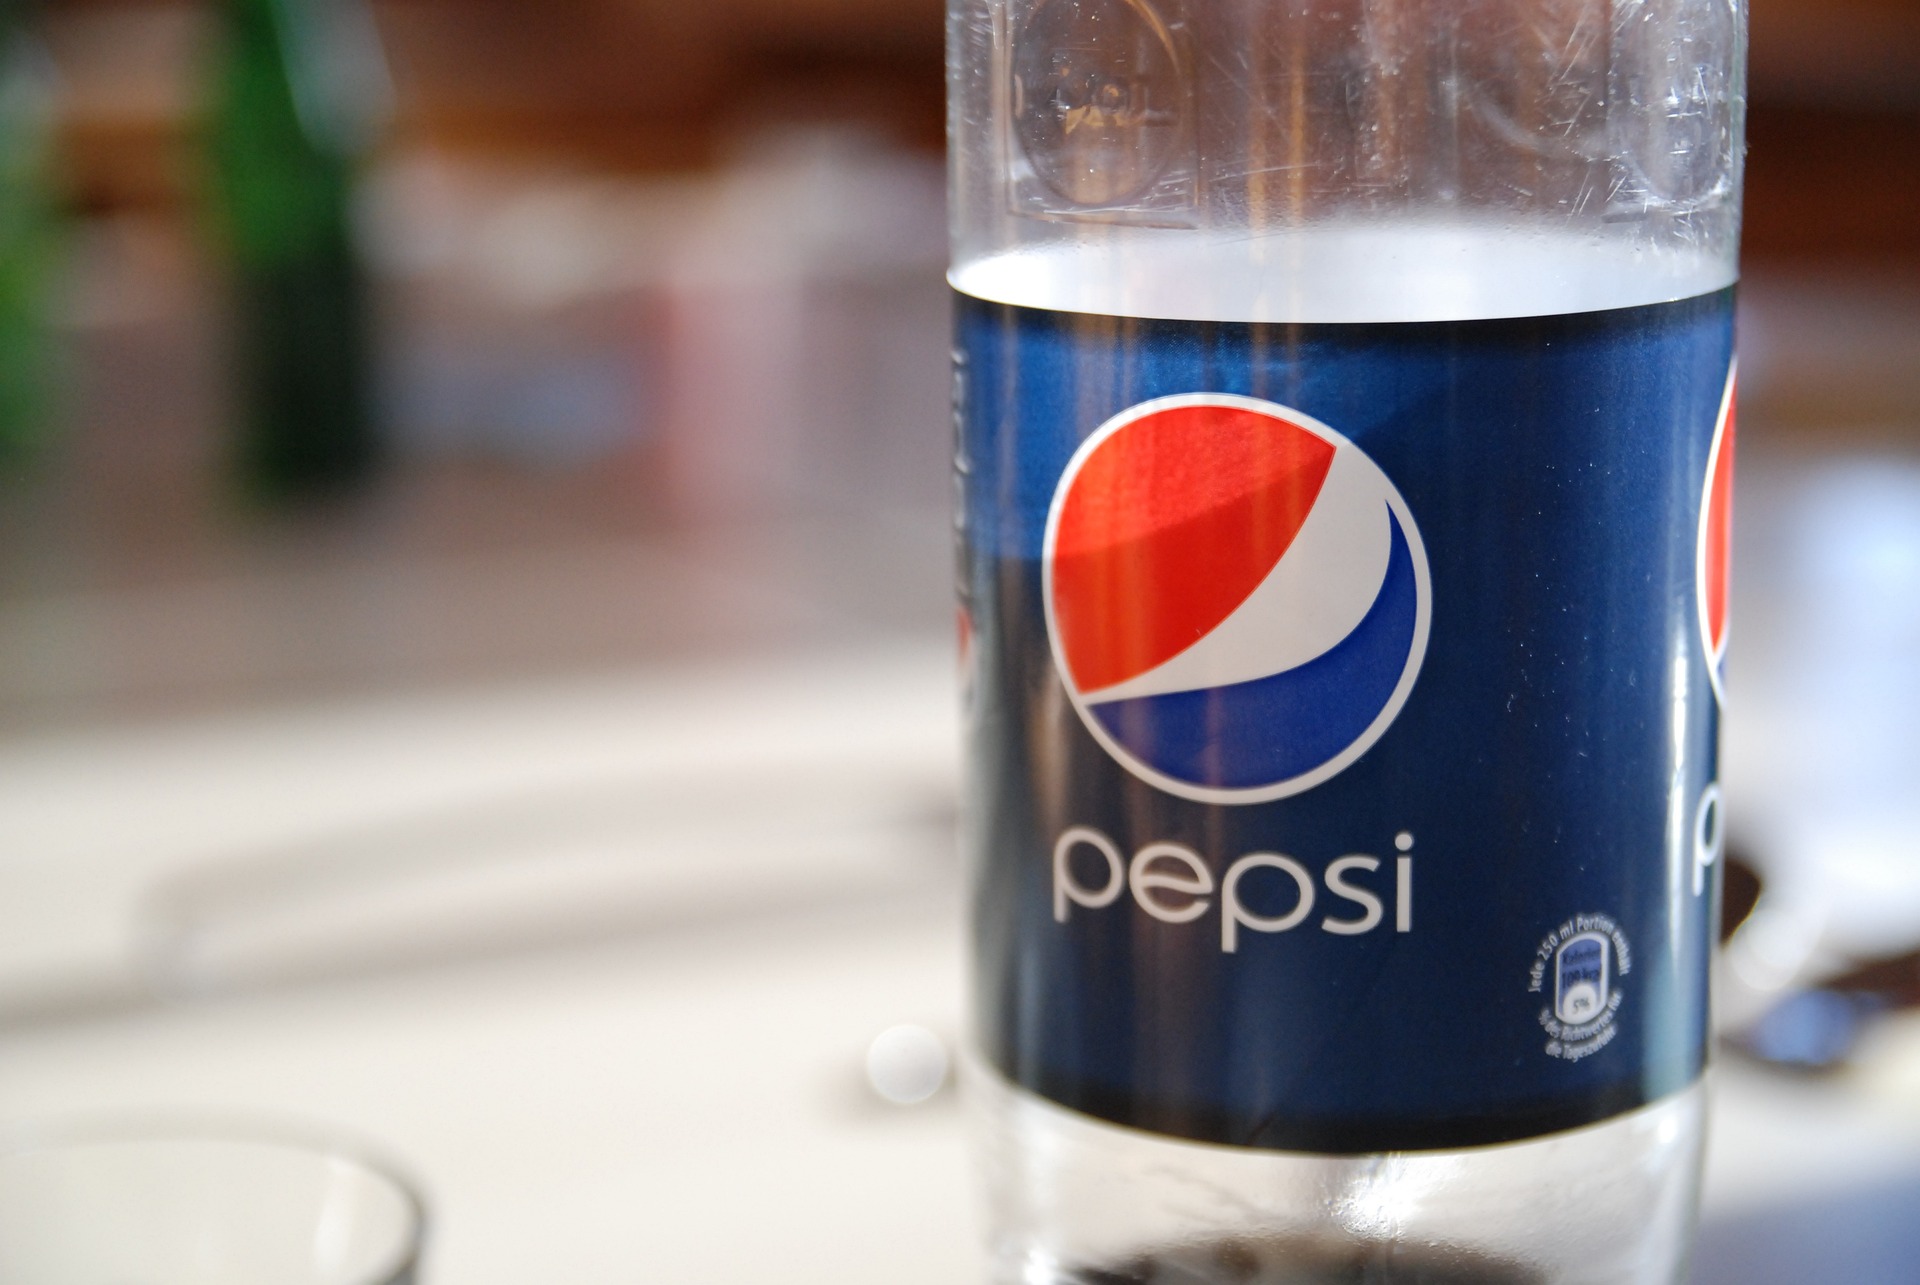 Pepsi Soft Drinks Soon to Be Bottled in Hungary